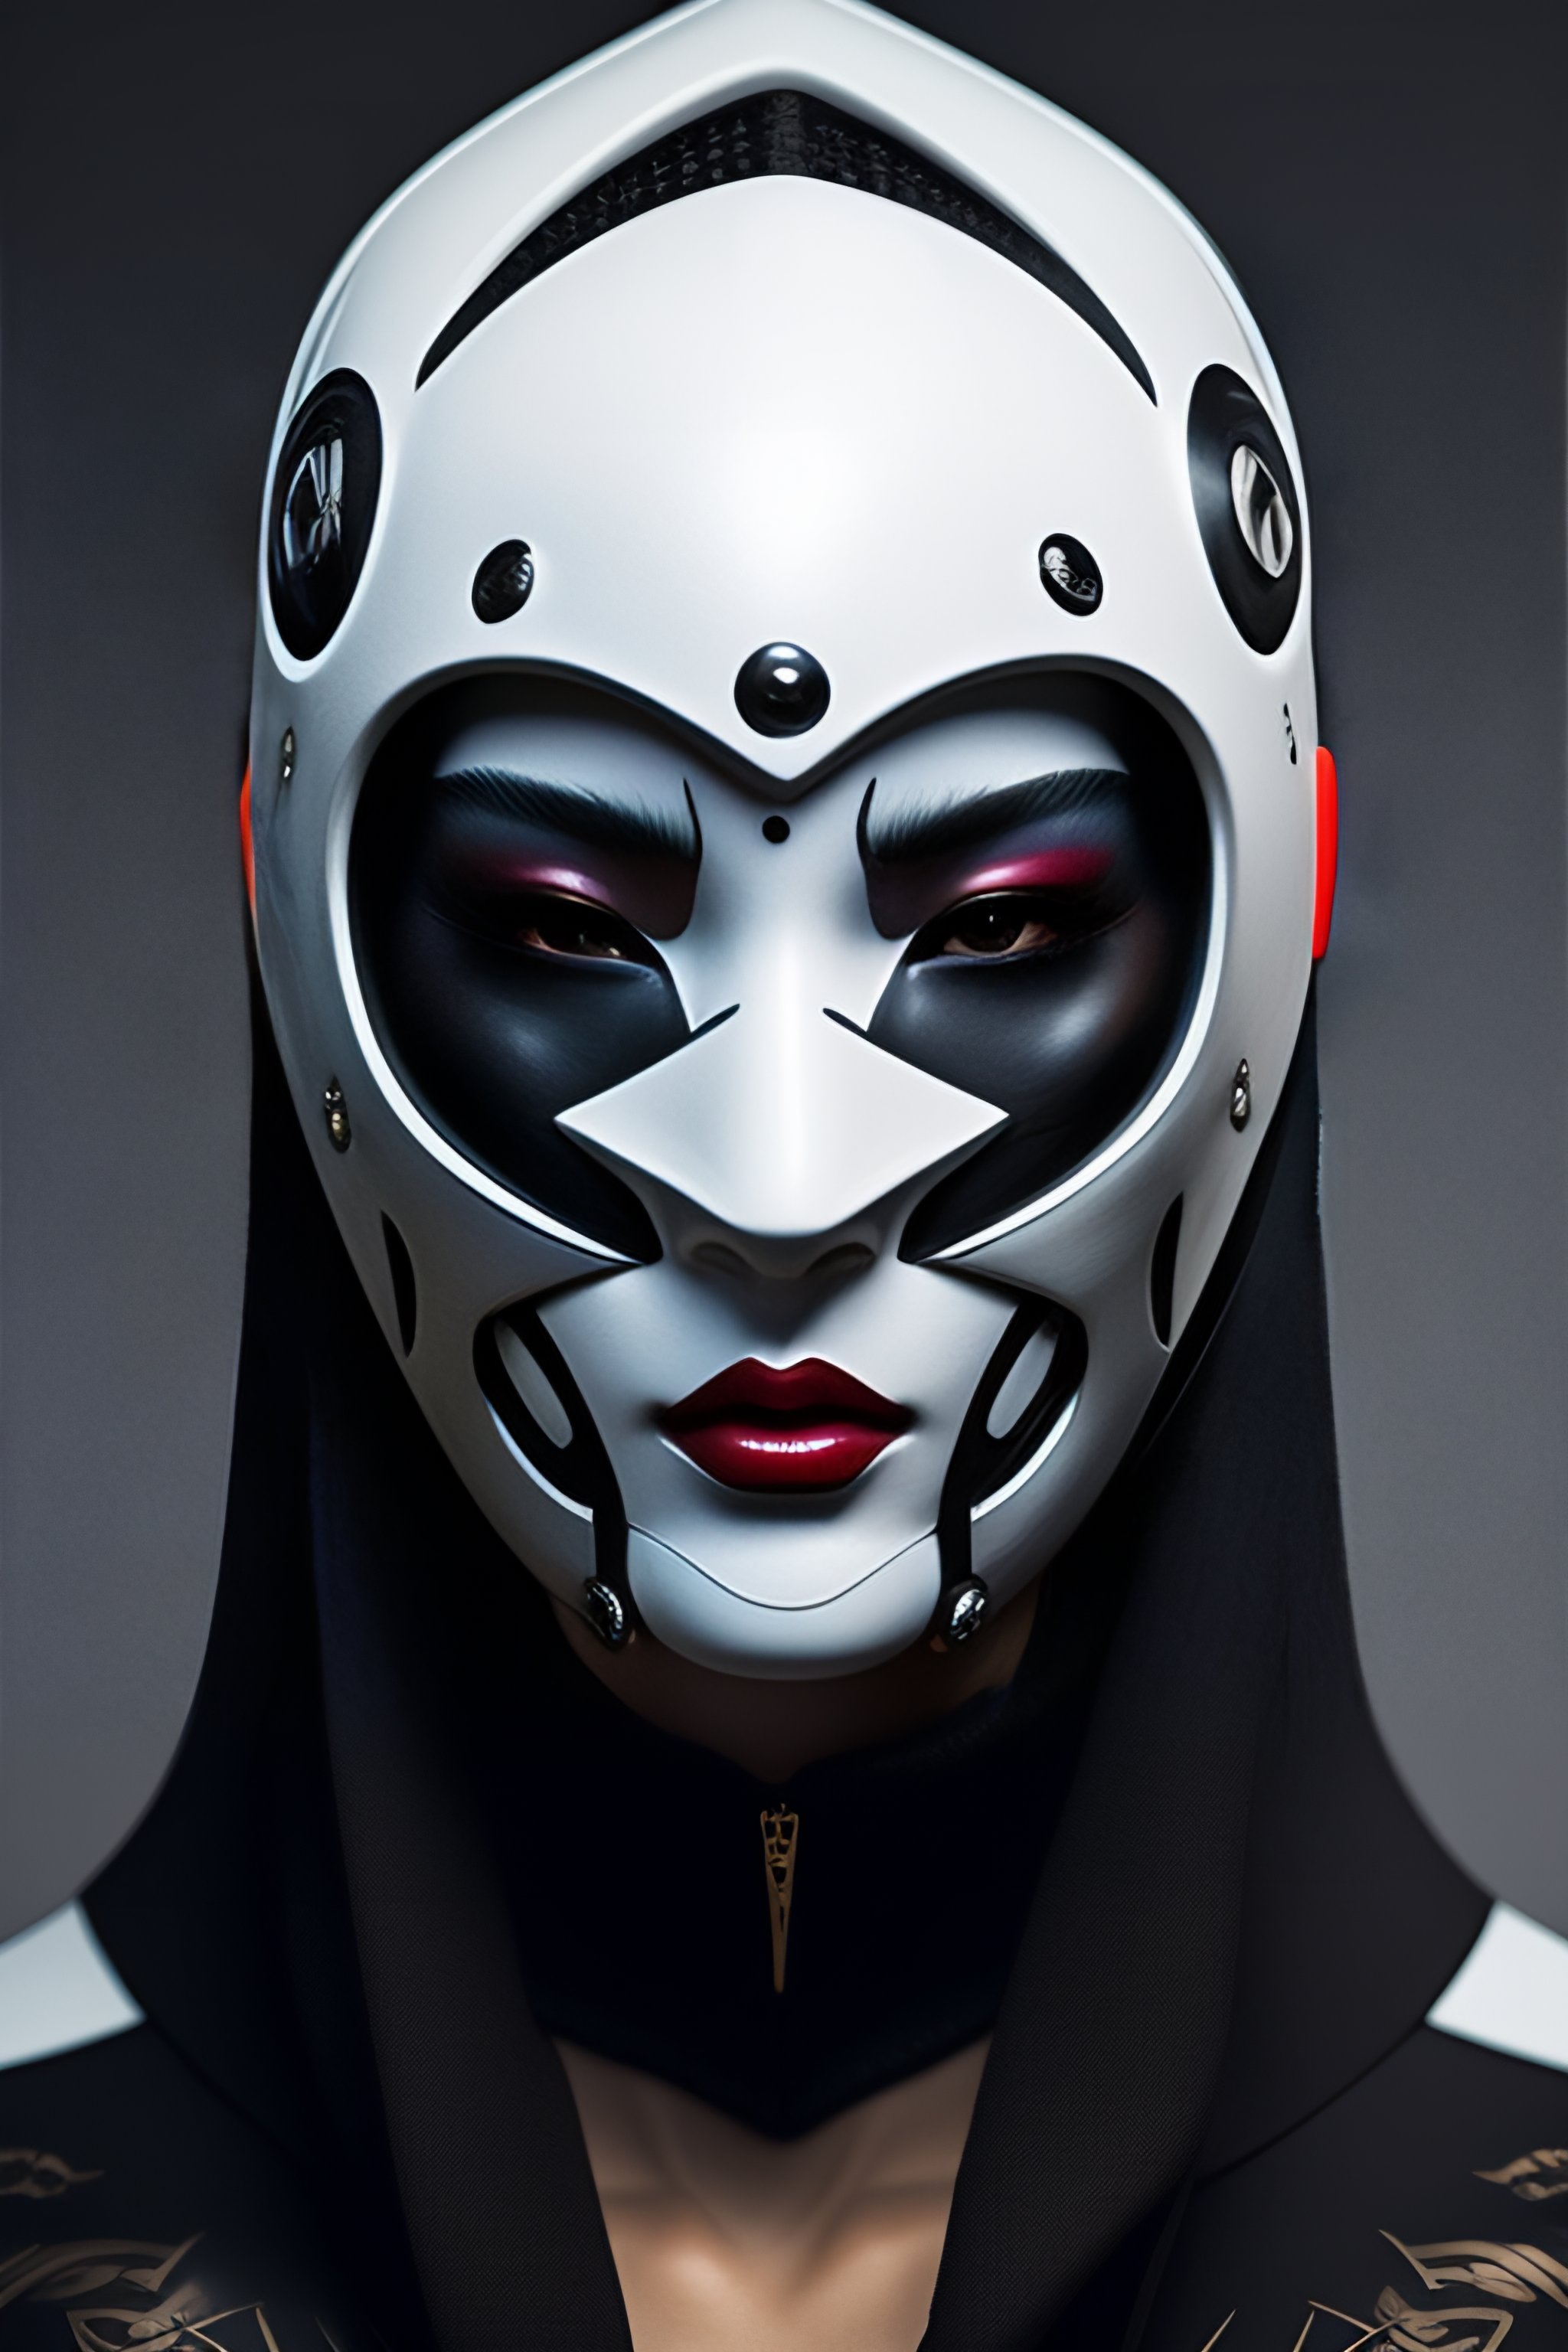 Lexica Only Oni Mask Cyberpunk White And Black 3704